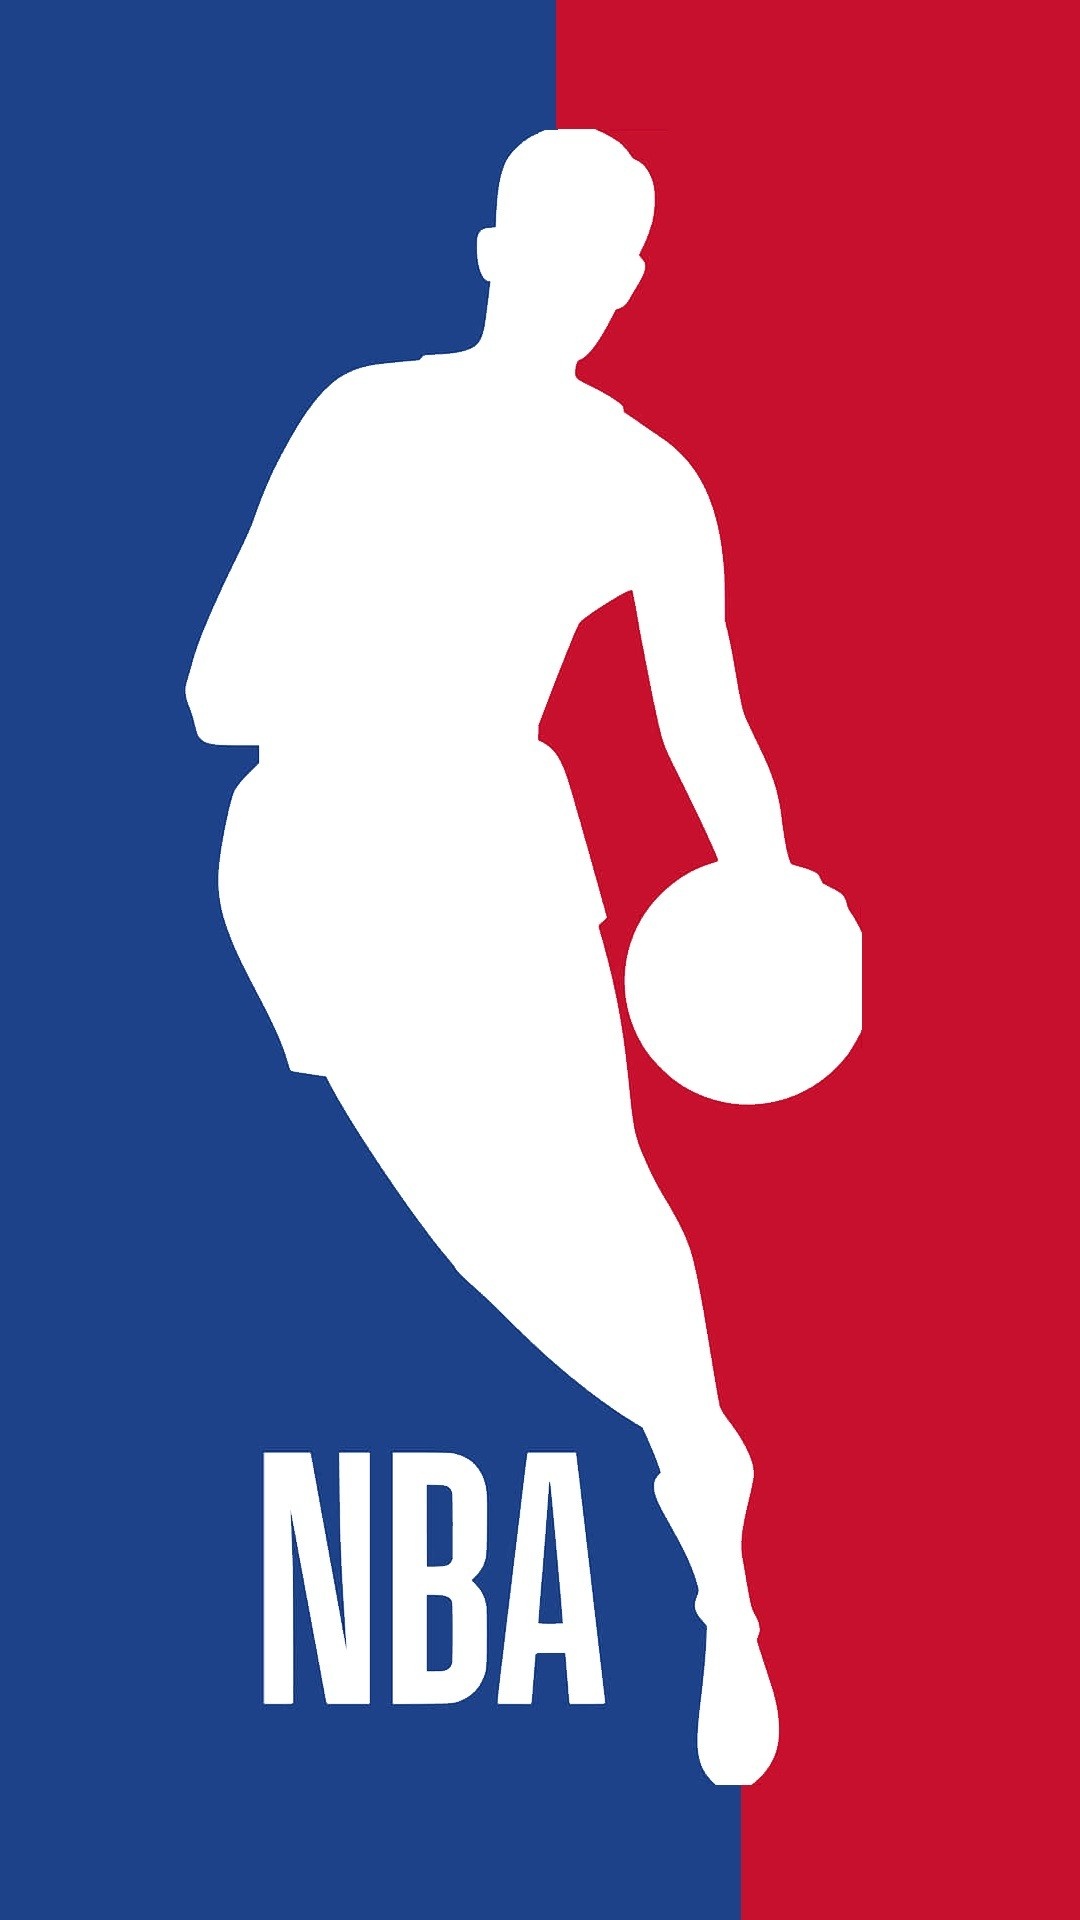 NBA phone wallpapers, Mobile customization, Basketball fans, Personal style, 1080x1920 Full HD Handy